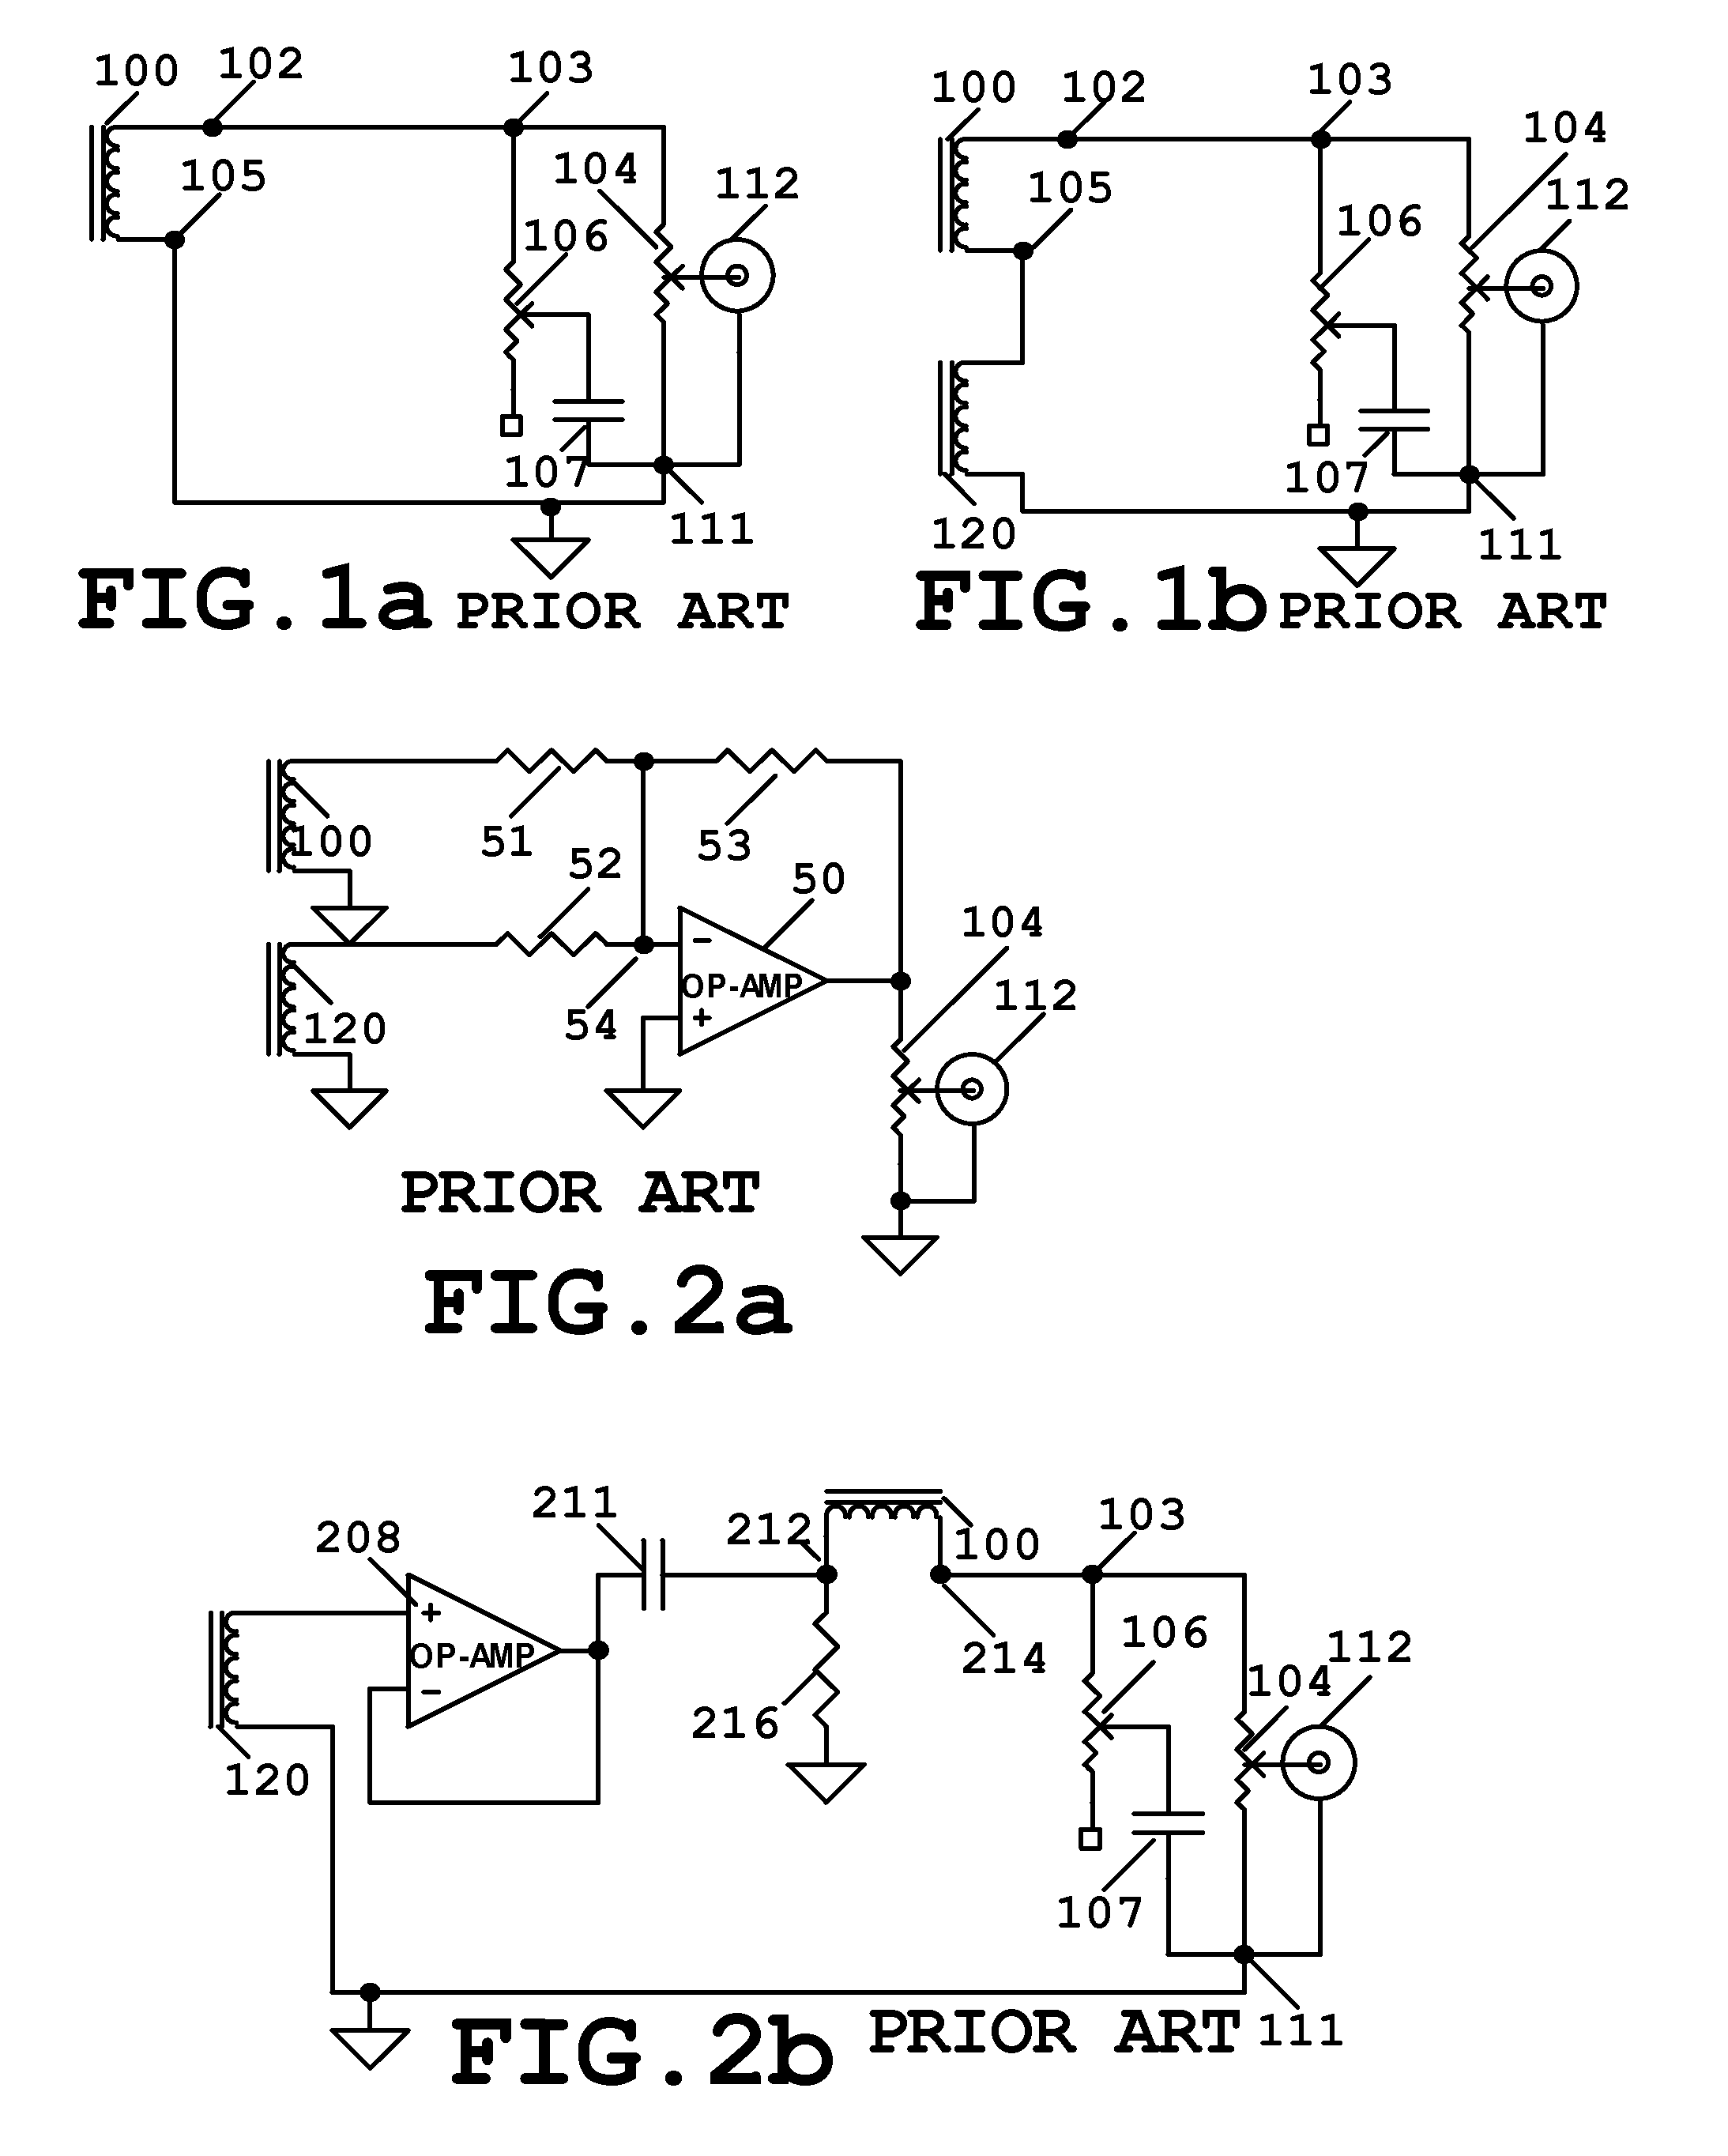 Pickup system for stringed musical instruments comprises of non-humbucking pickups with noise cancelling by current injection